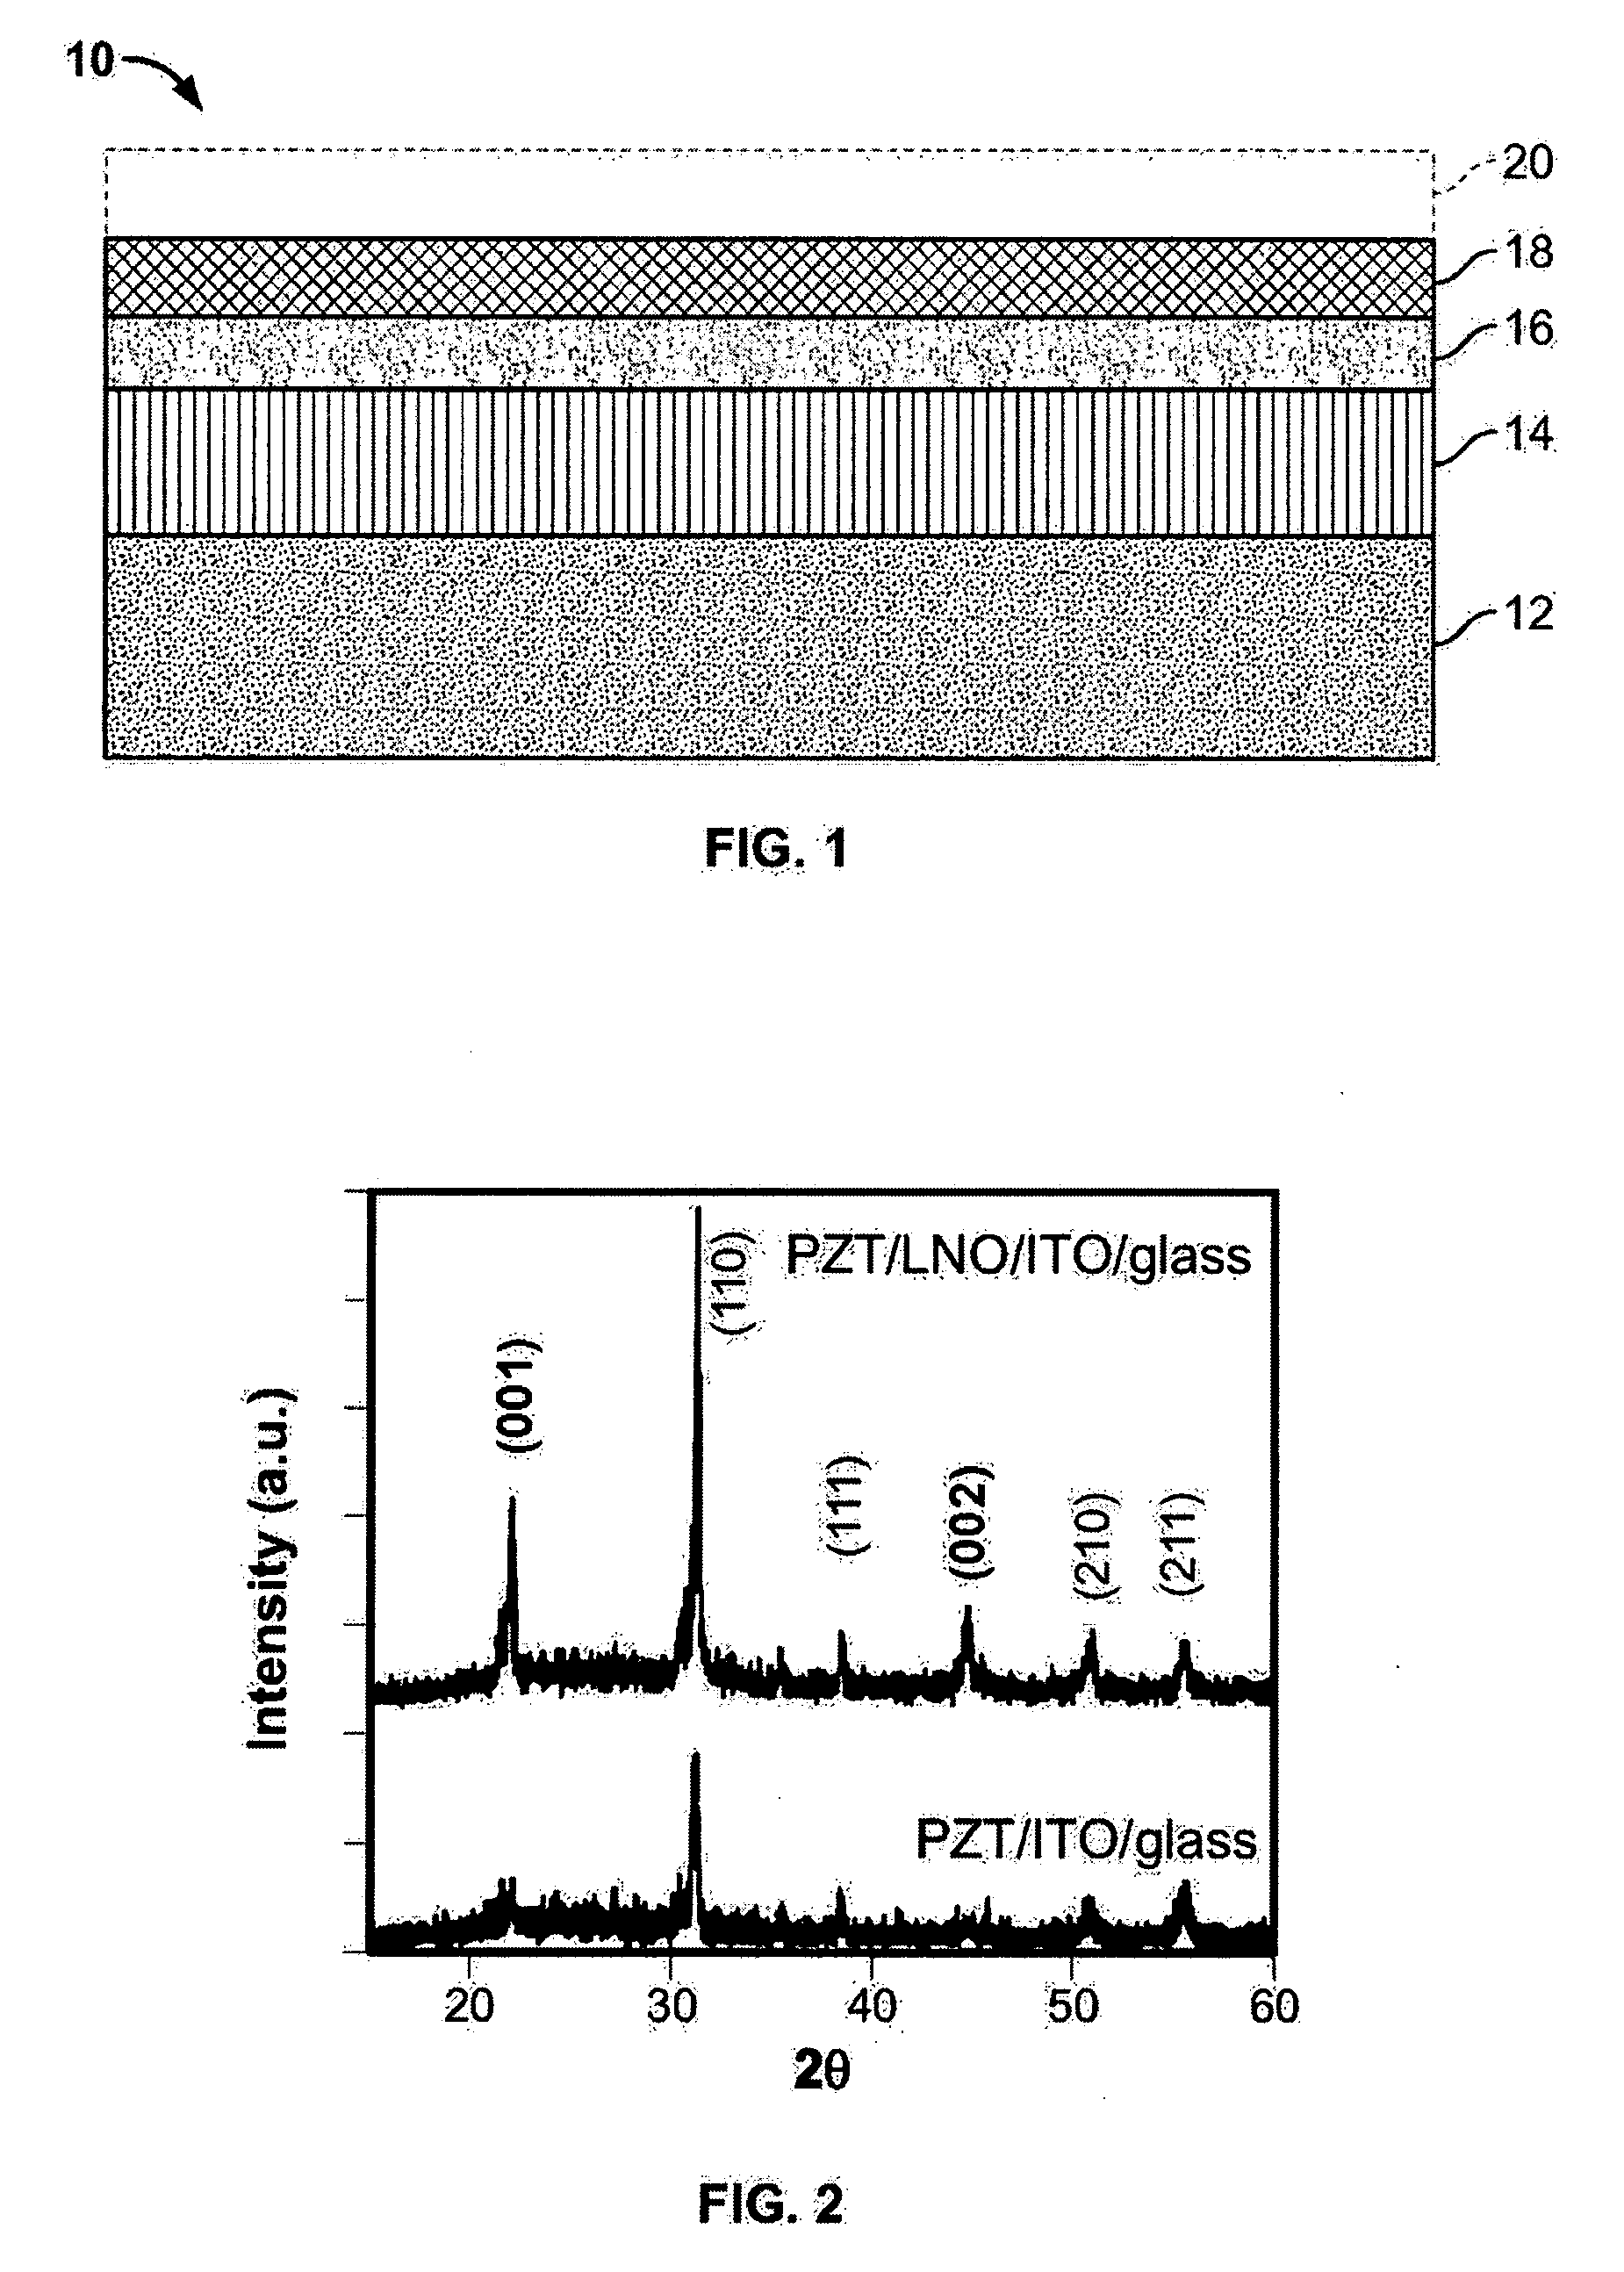 Transparent oxide capacitor structures